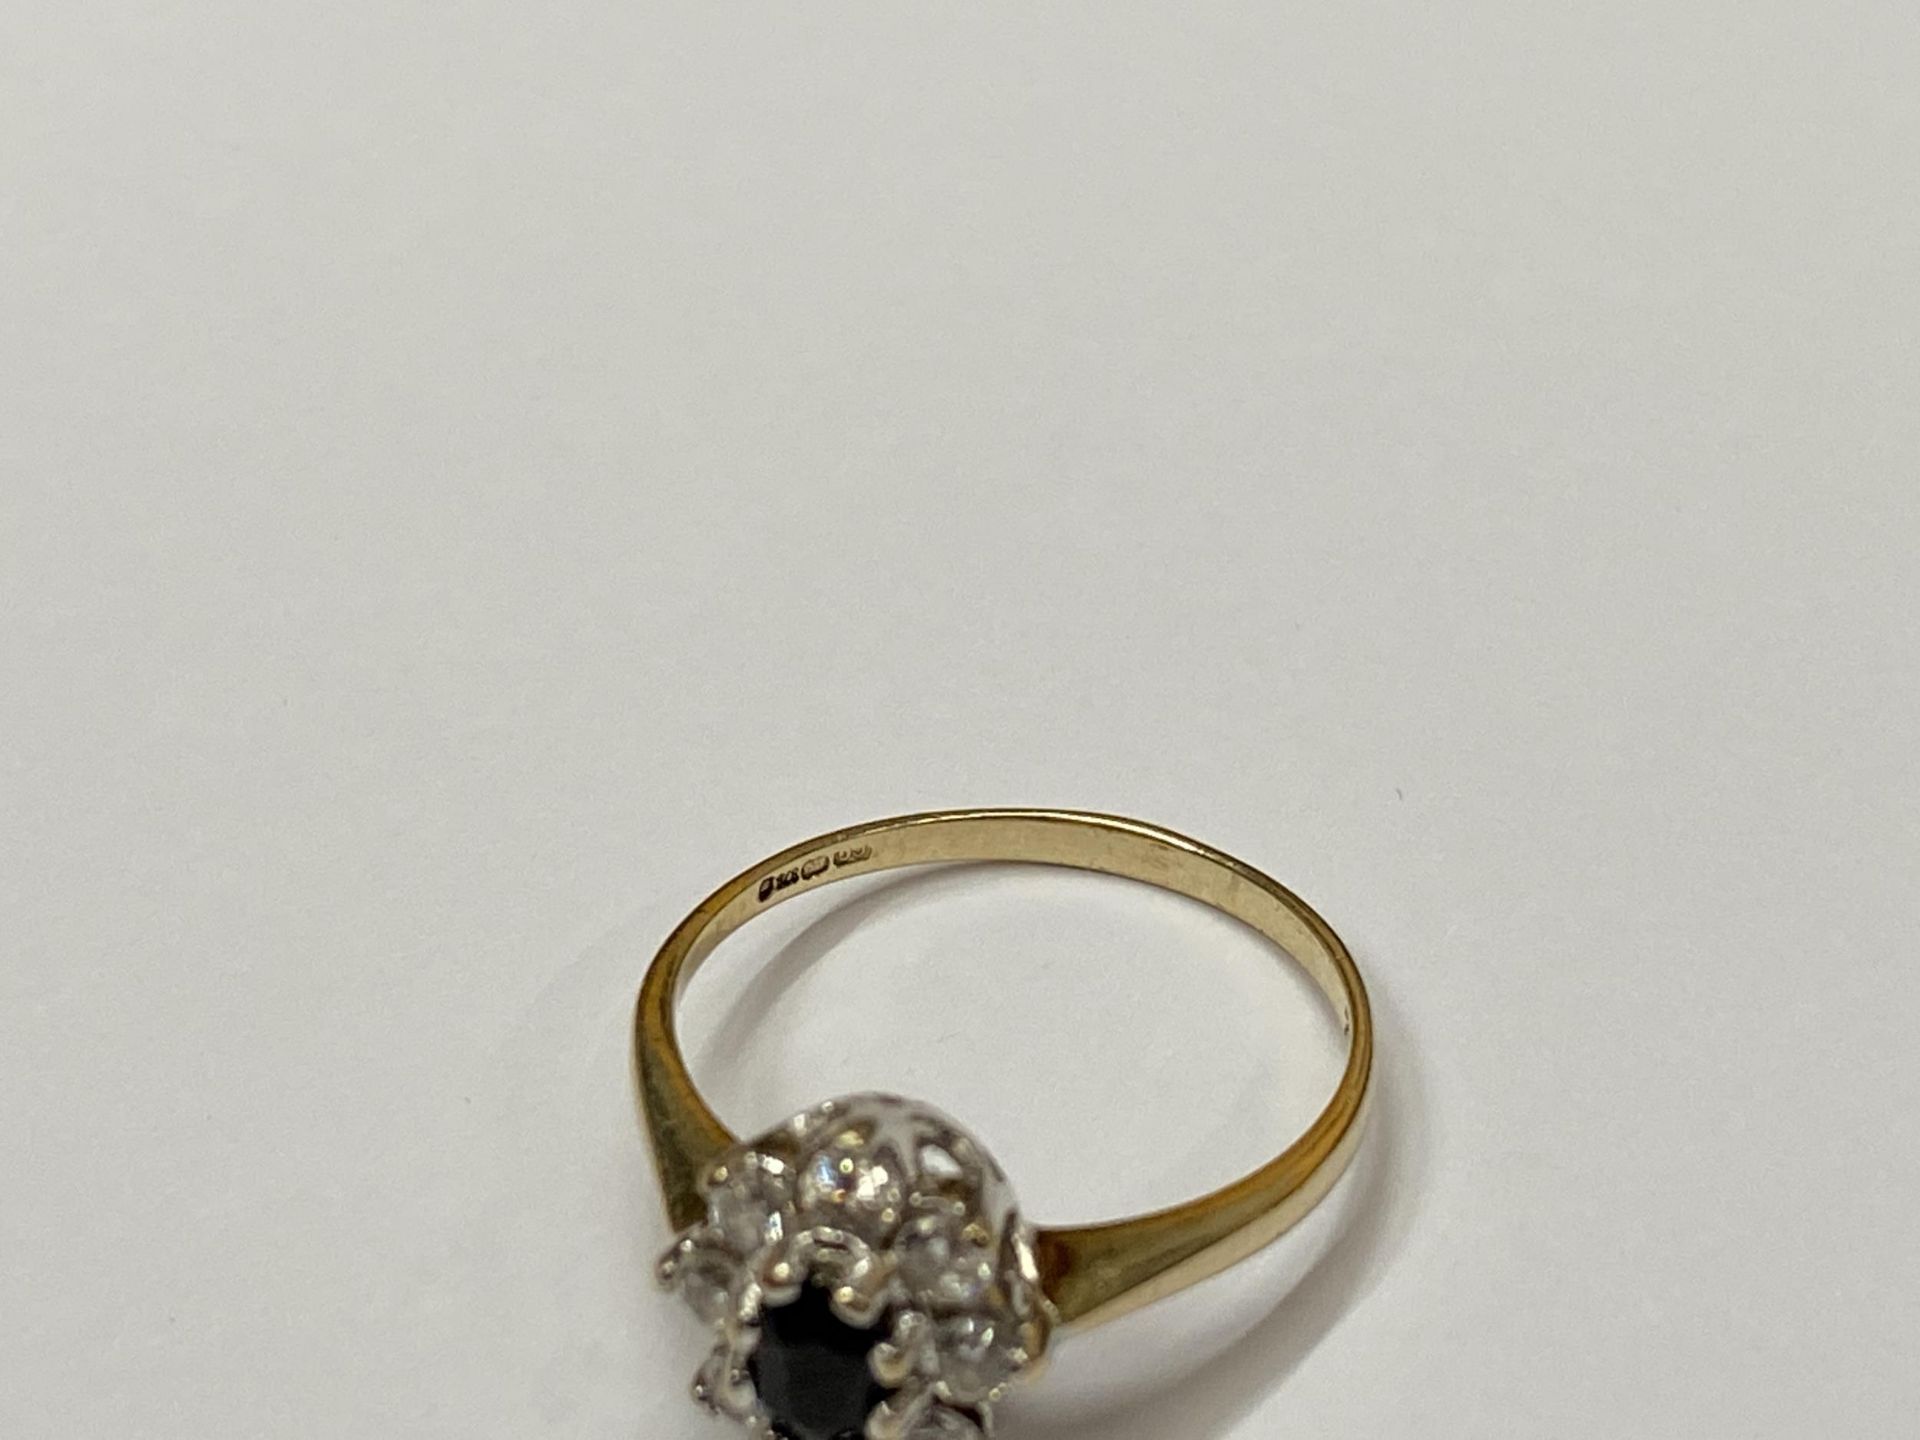 A 9CT YELLOW GOLD RING WITH SAPPHIRE AND CZ STONES, 2G - Image 2 of 2